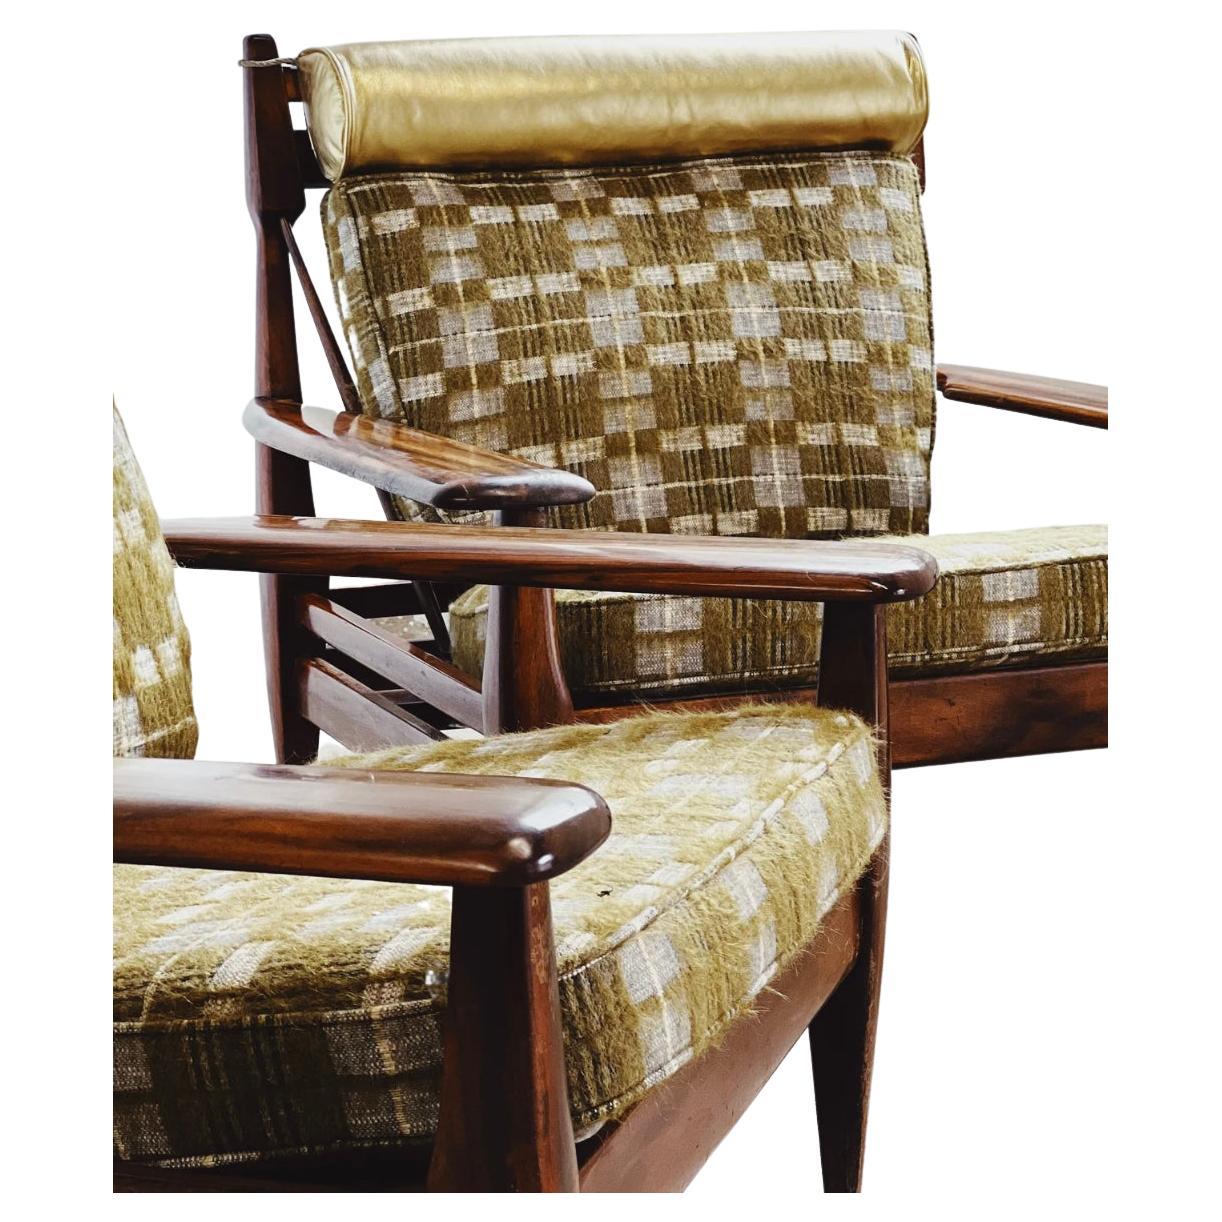 Rare pair of 1960s rosewood lounge chairs by Jean Gillon. Recovered in a Pierre Frey check wool, featuring green, blue and grey colors. Head rest in Italian metallic gold leather. Fabric in new condition, some scuff marks to the legs of the chair.